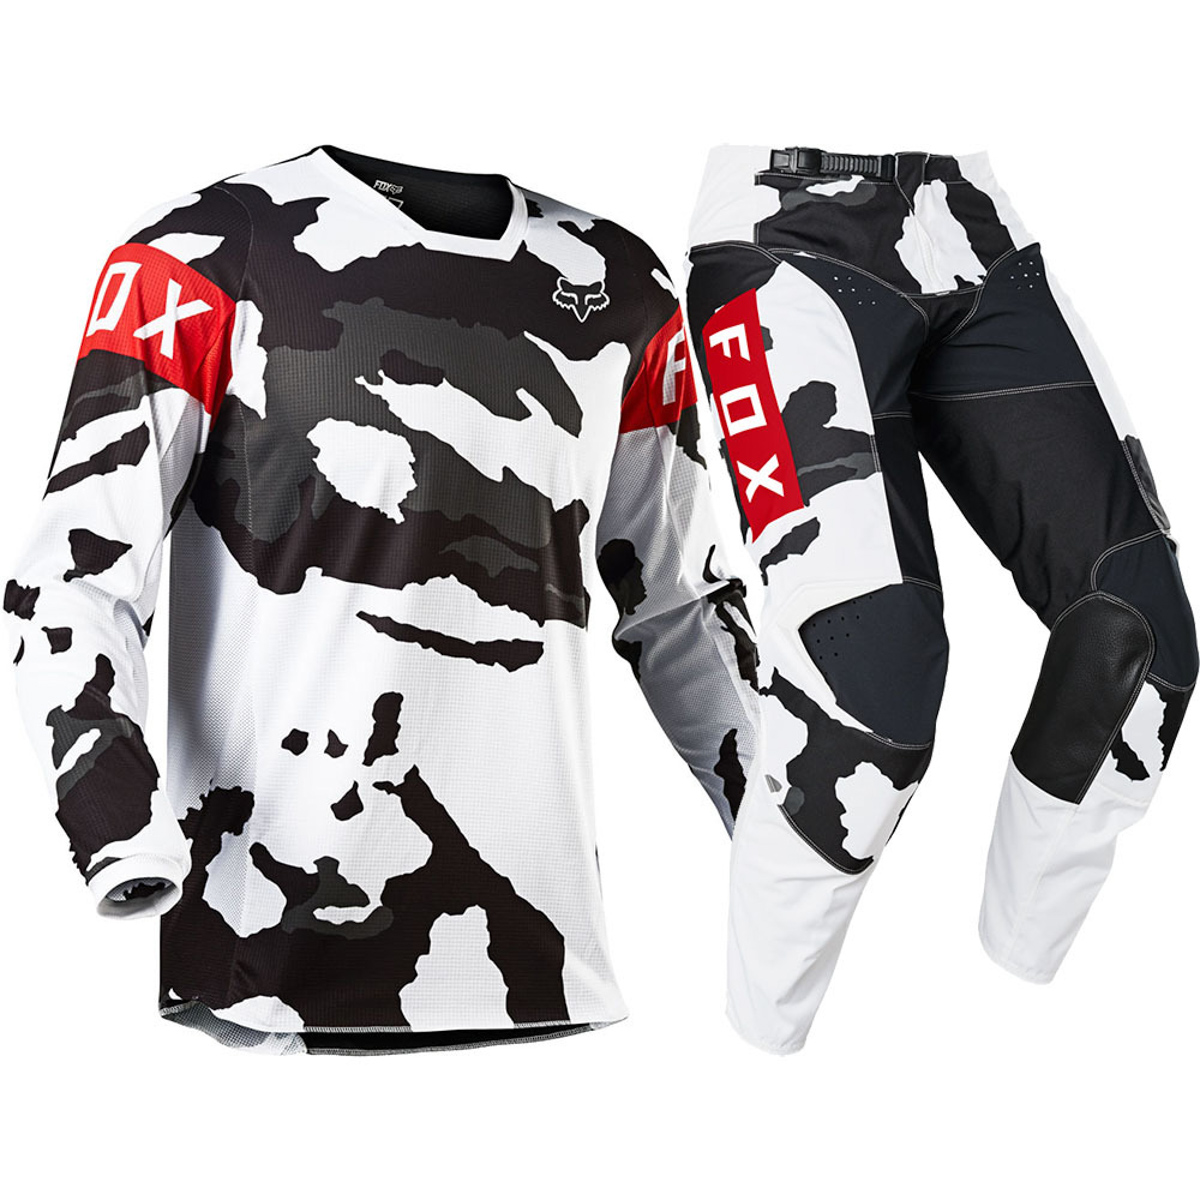 Our Top Five 2021 Fox Gear Sets | MXstore